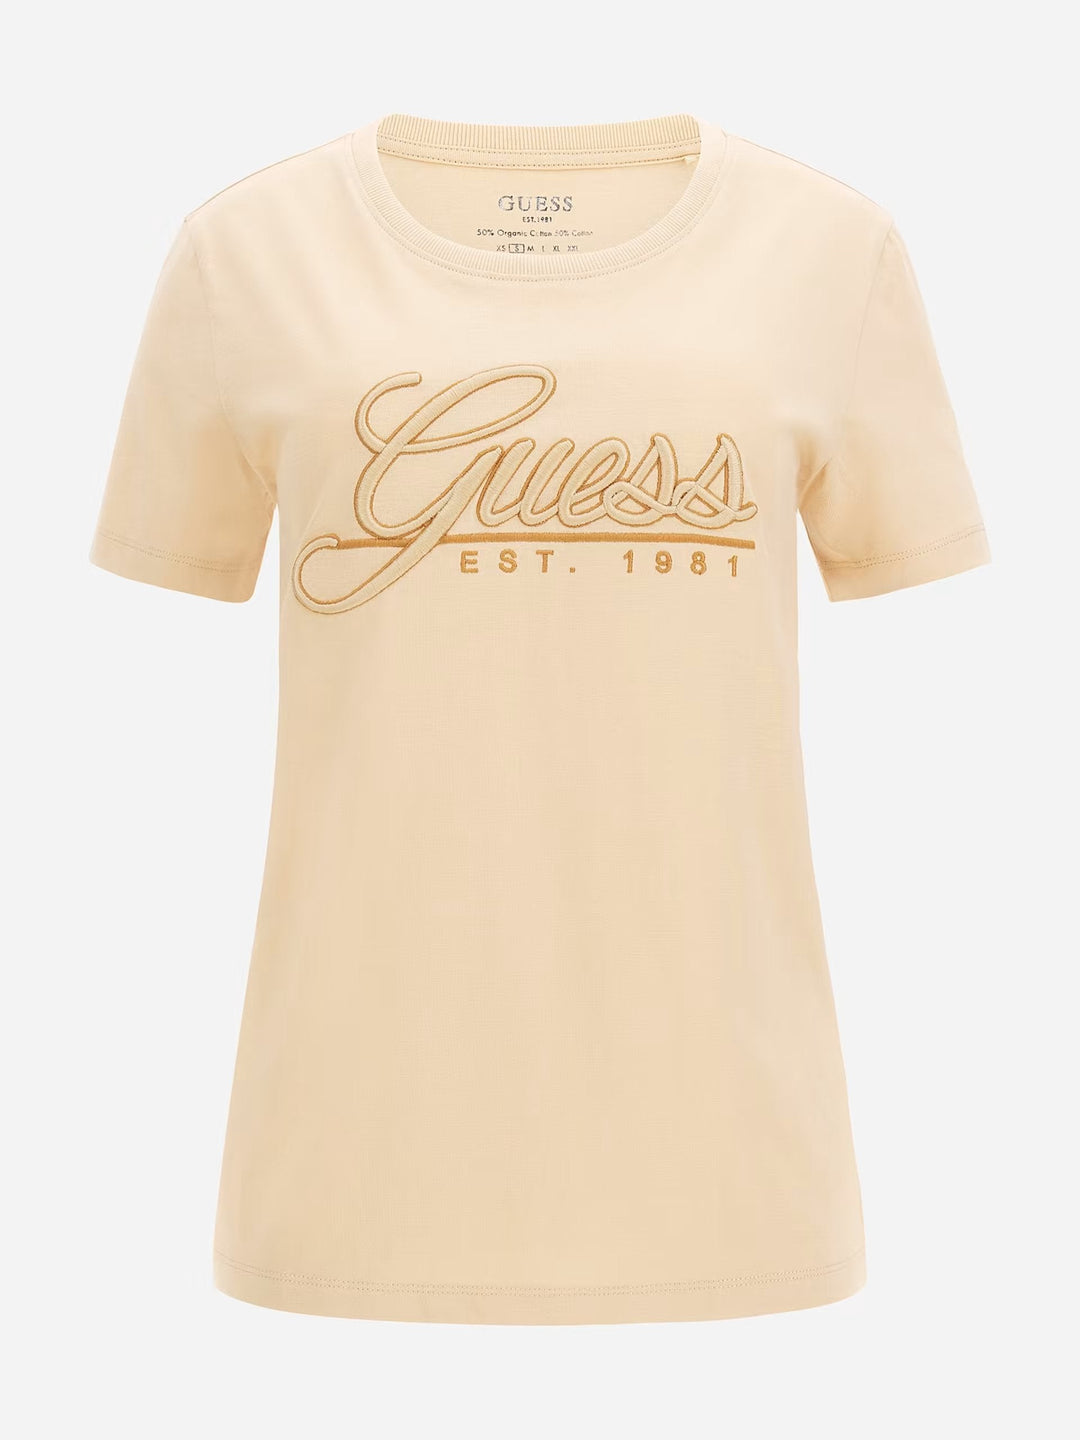 EMBROIDERED SCRIPT LOGO TEE - Guess